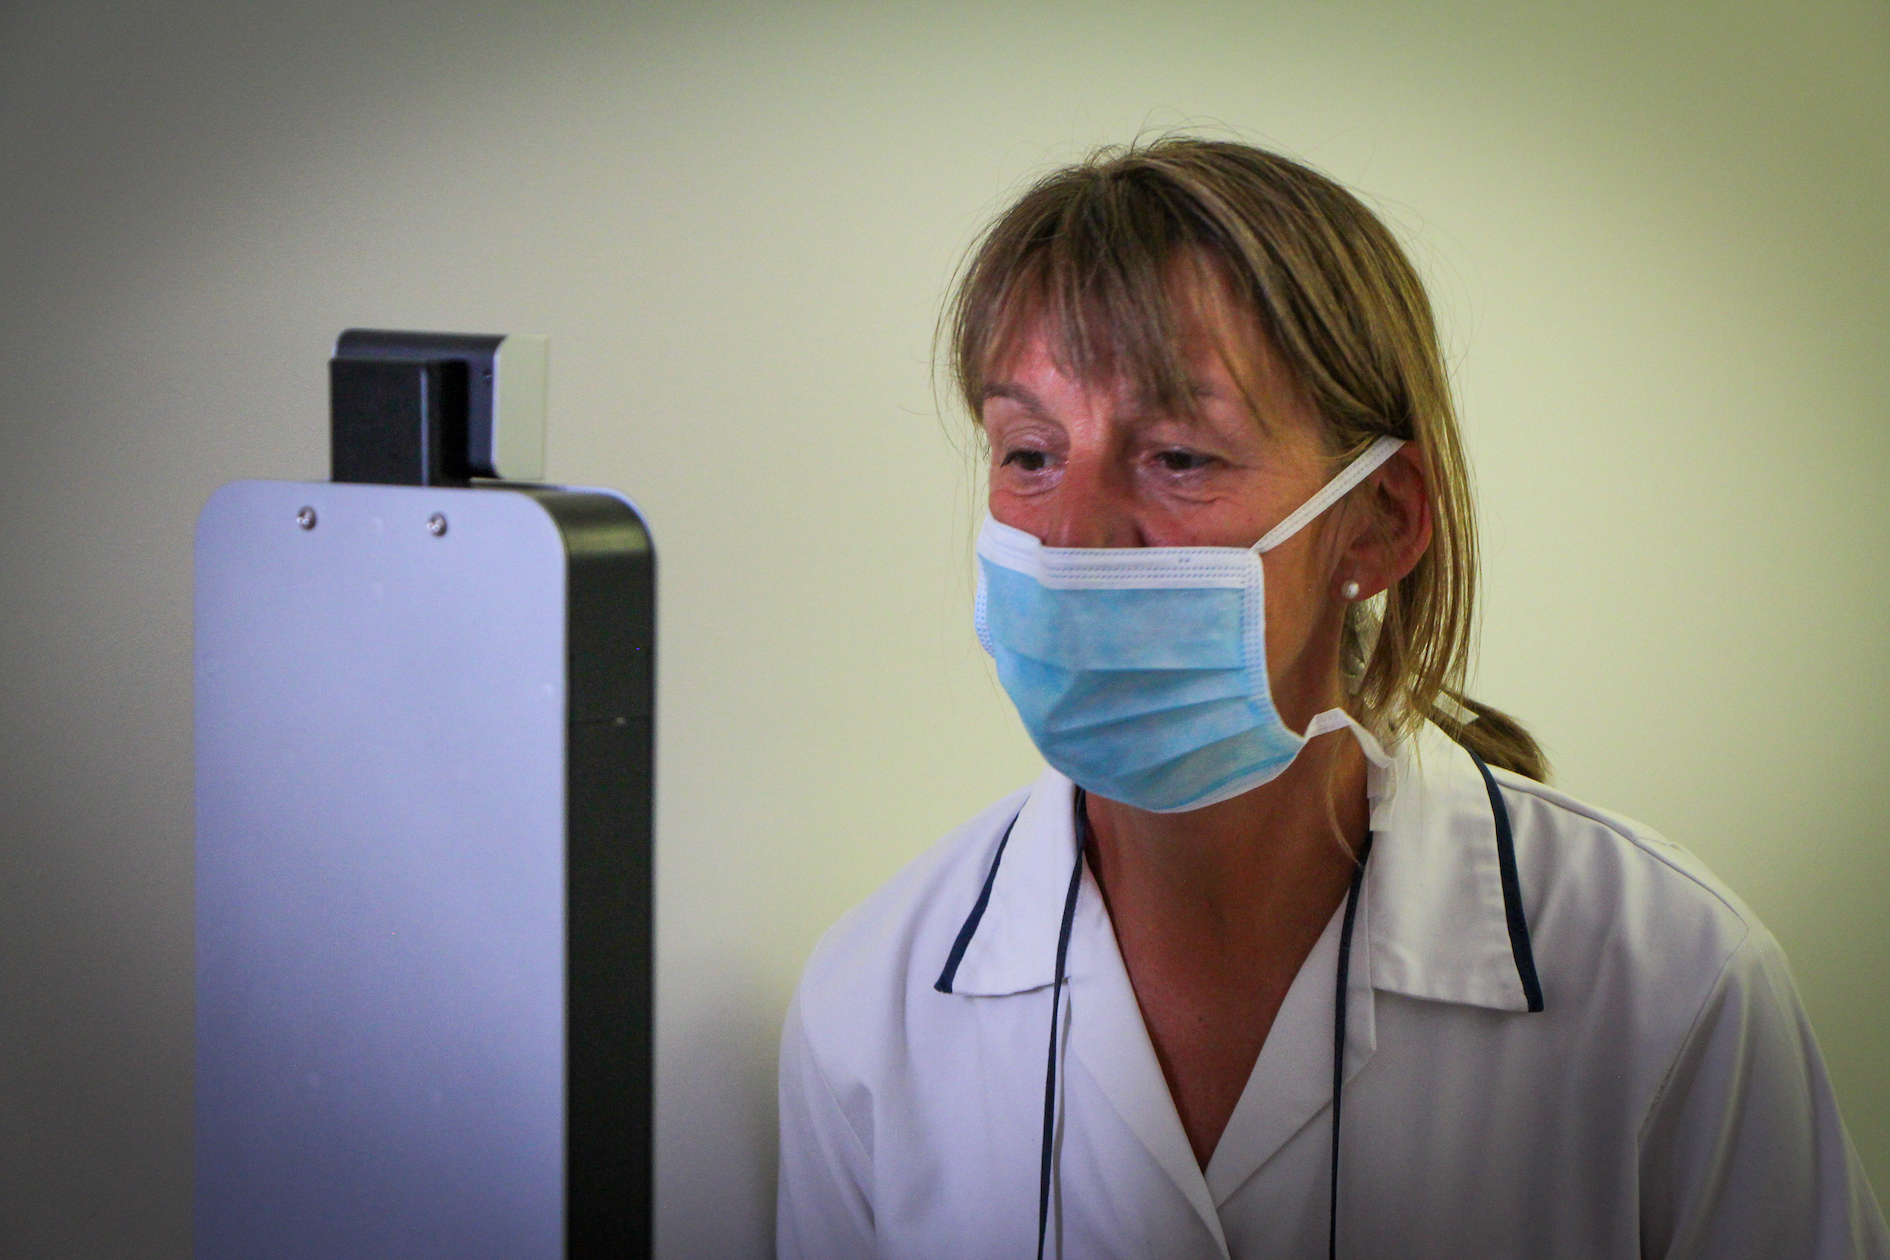 body temperature scan at a care home, wearing a mask, mask detection, temperature testing machine